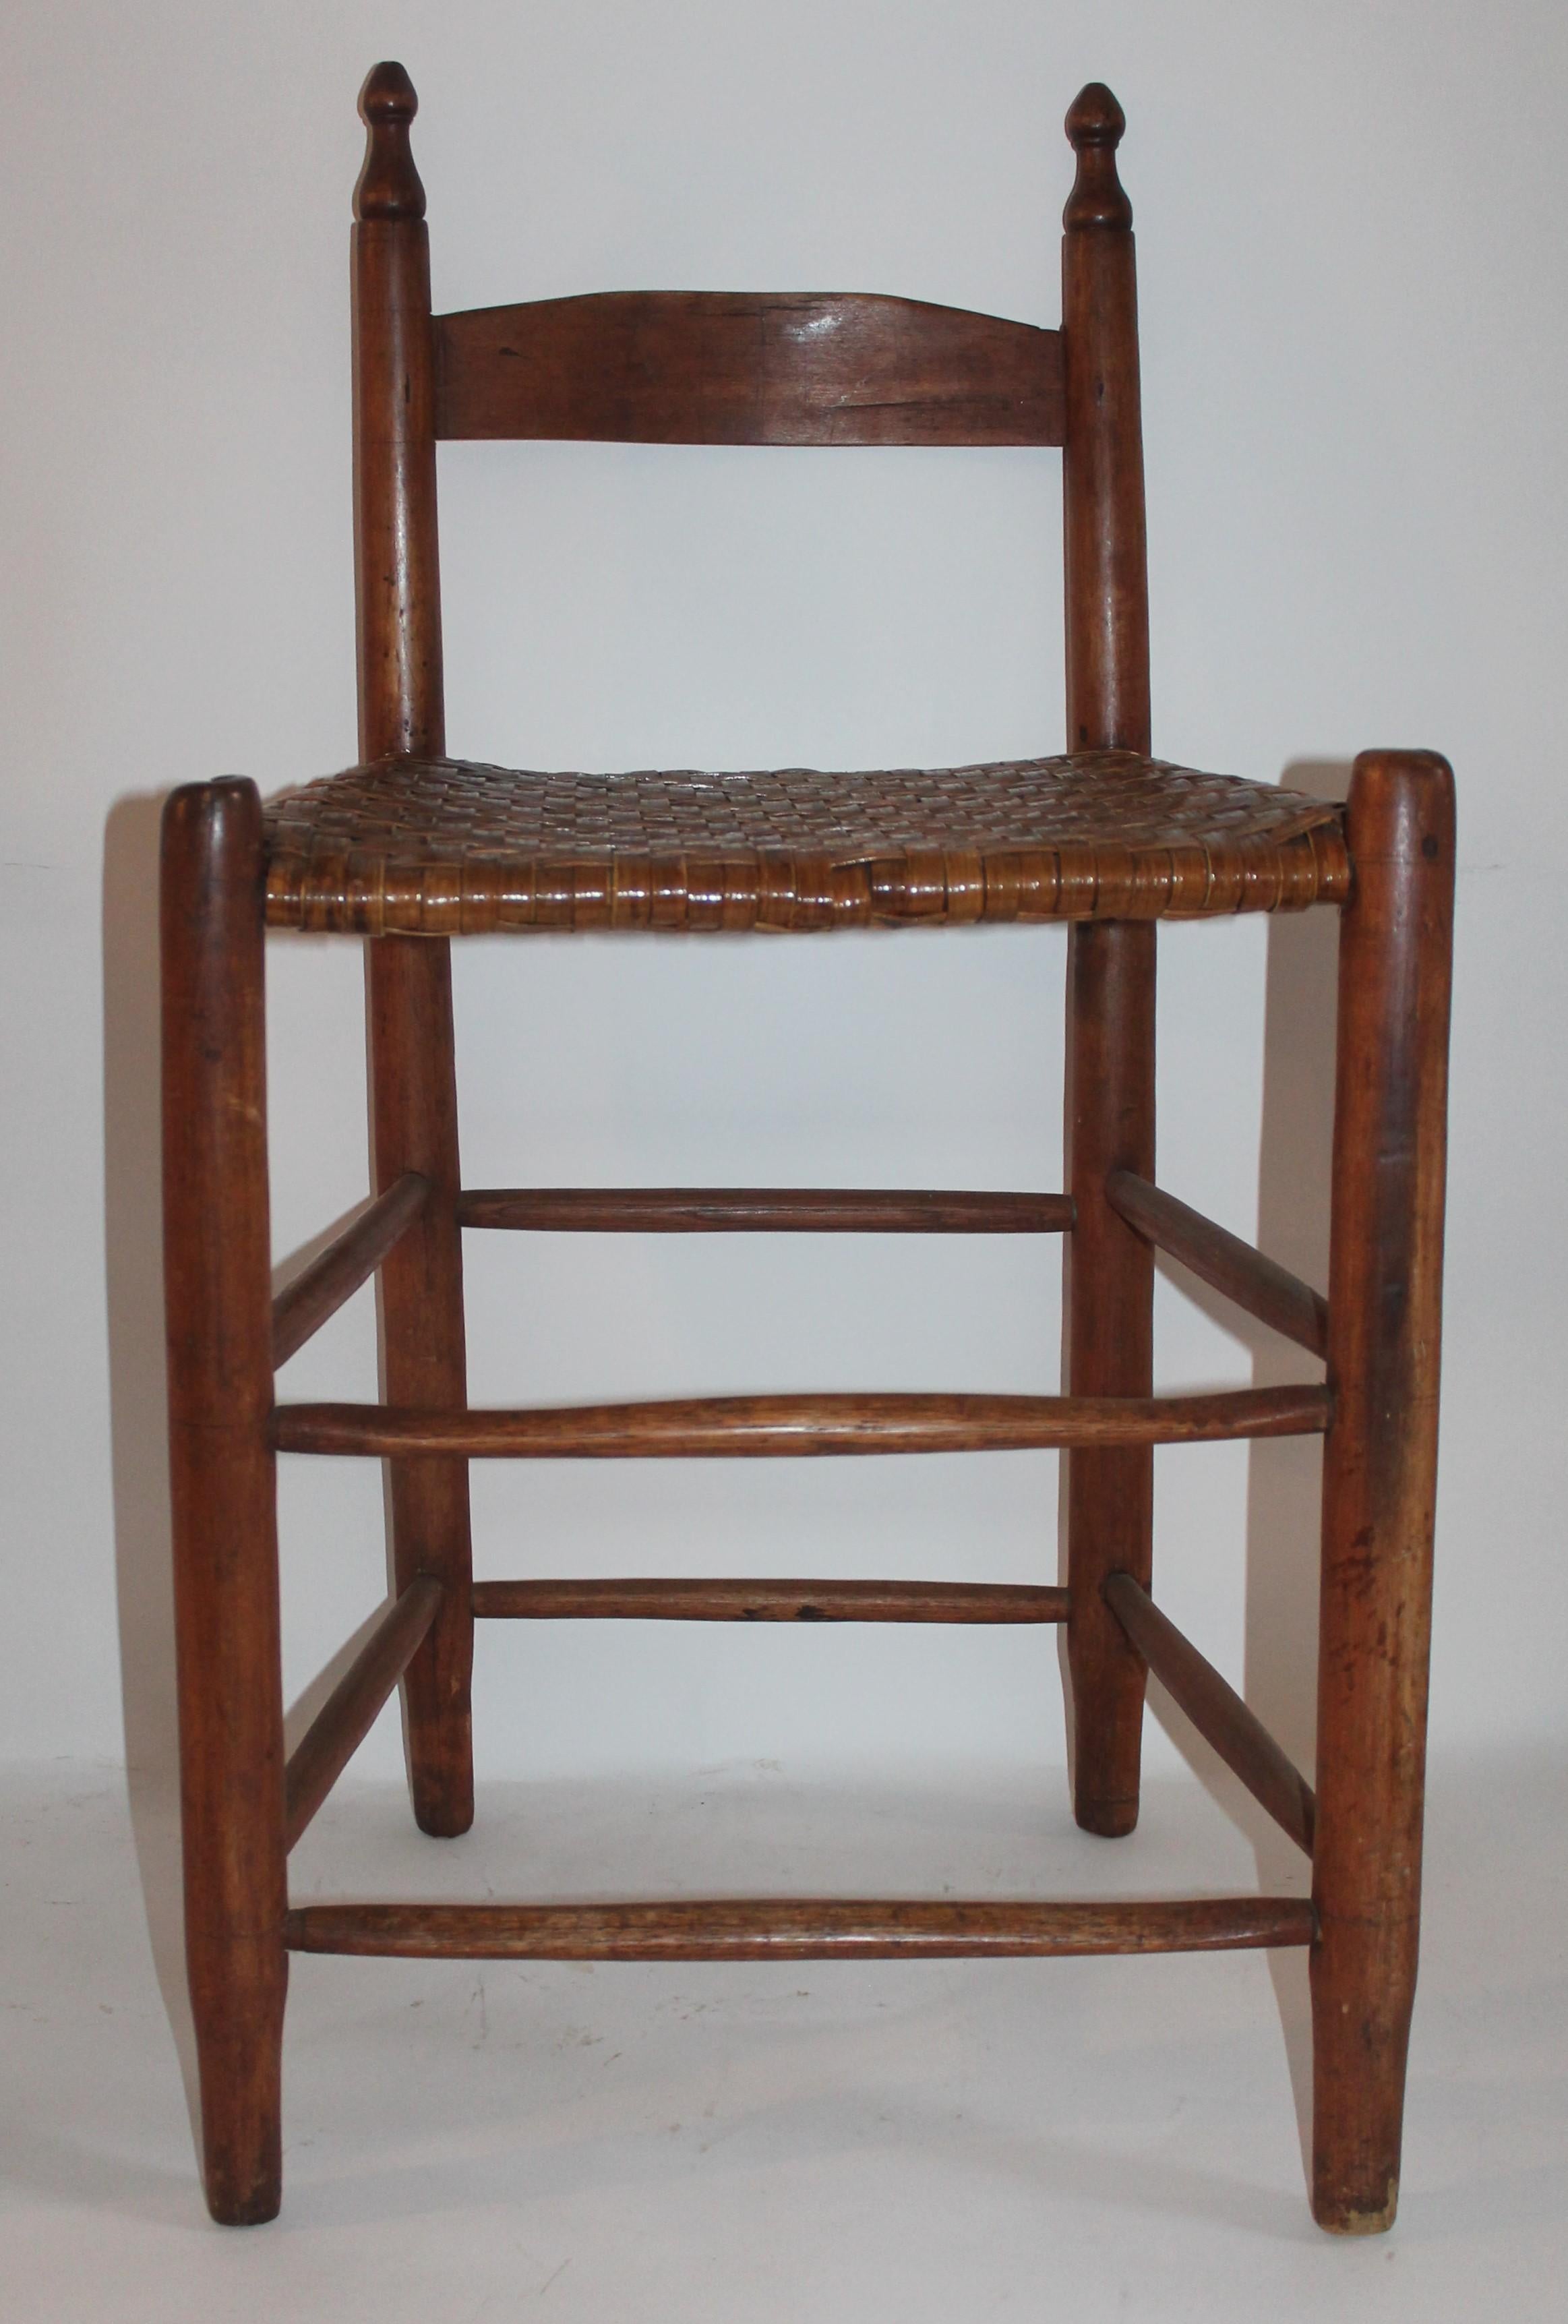 Country 19th Century Shaker Style Chair